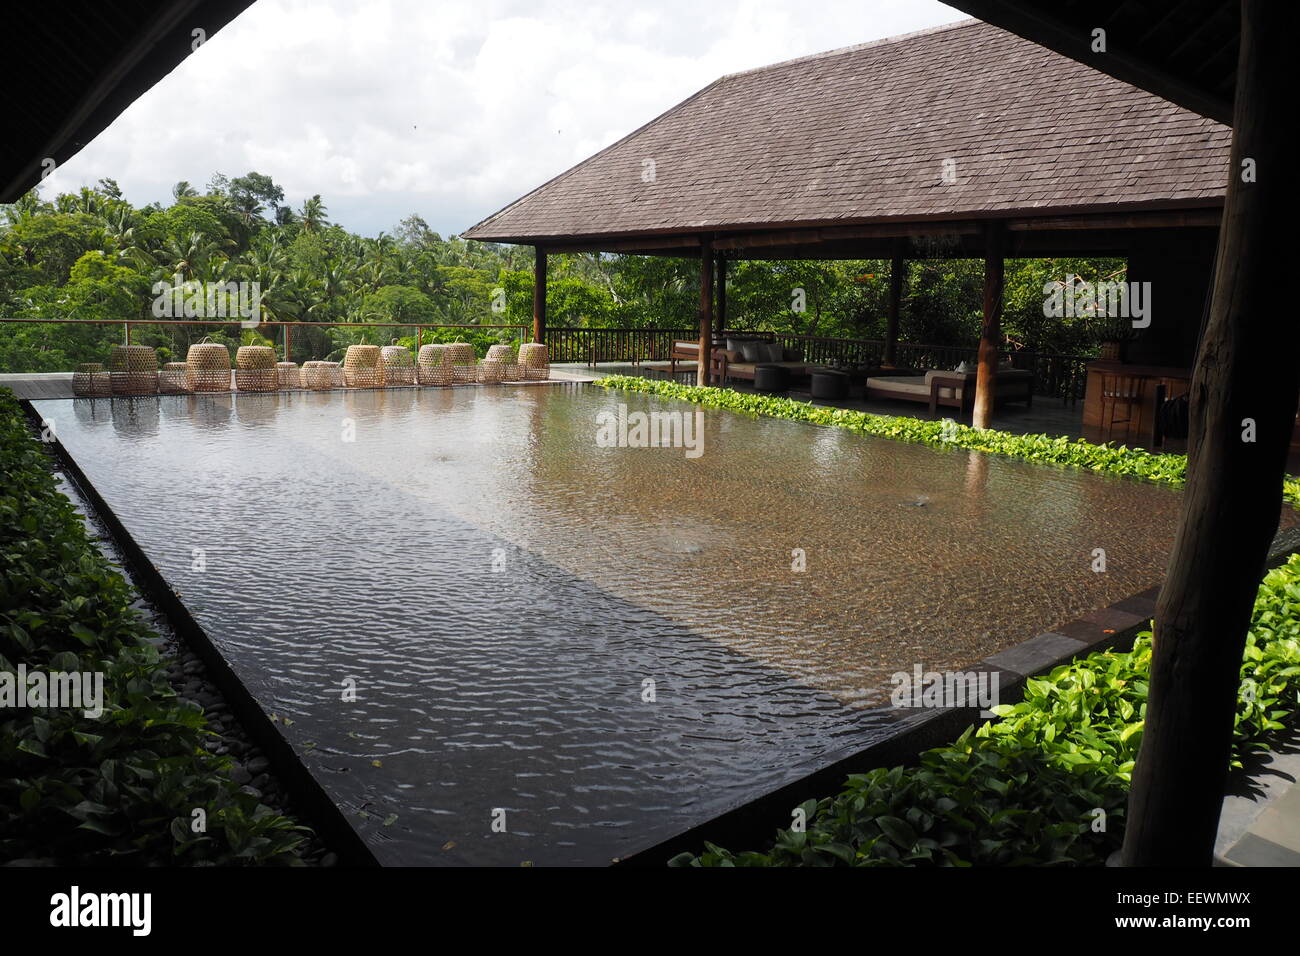 A pond in the forecourt of a hotel in Ubud, Bali Stock Photo